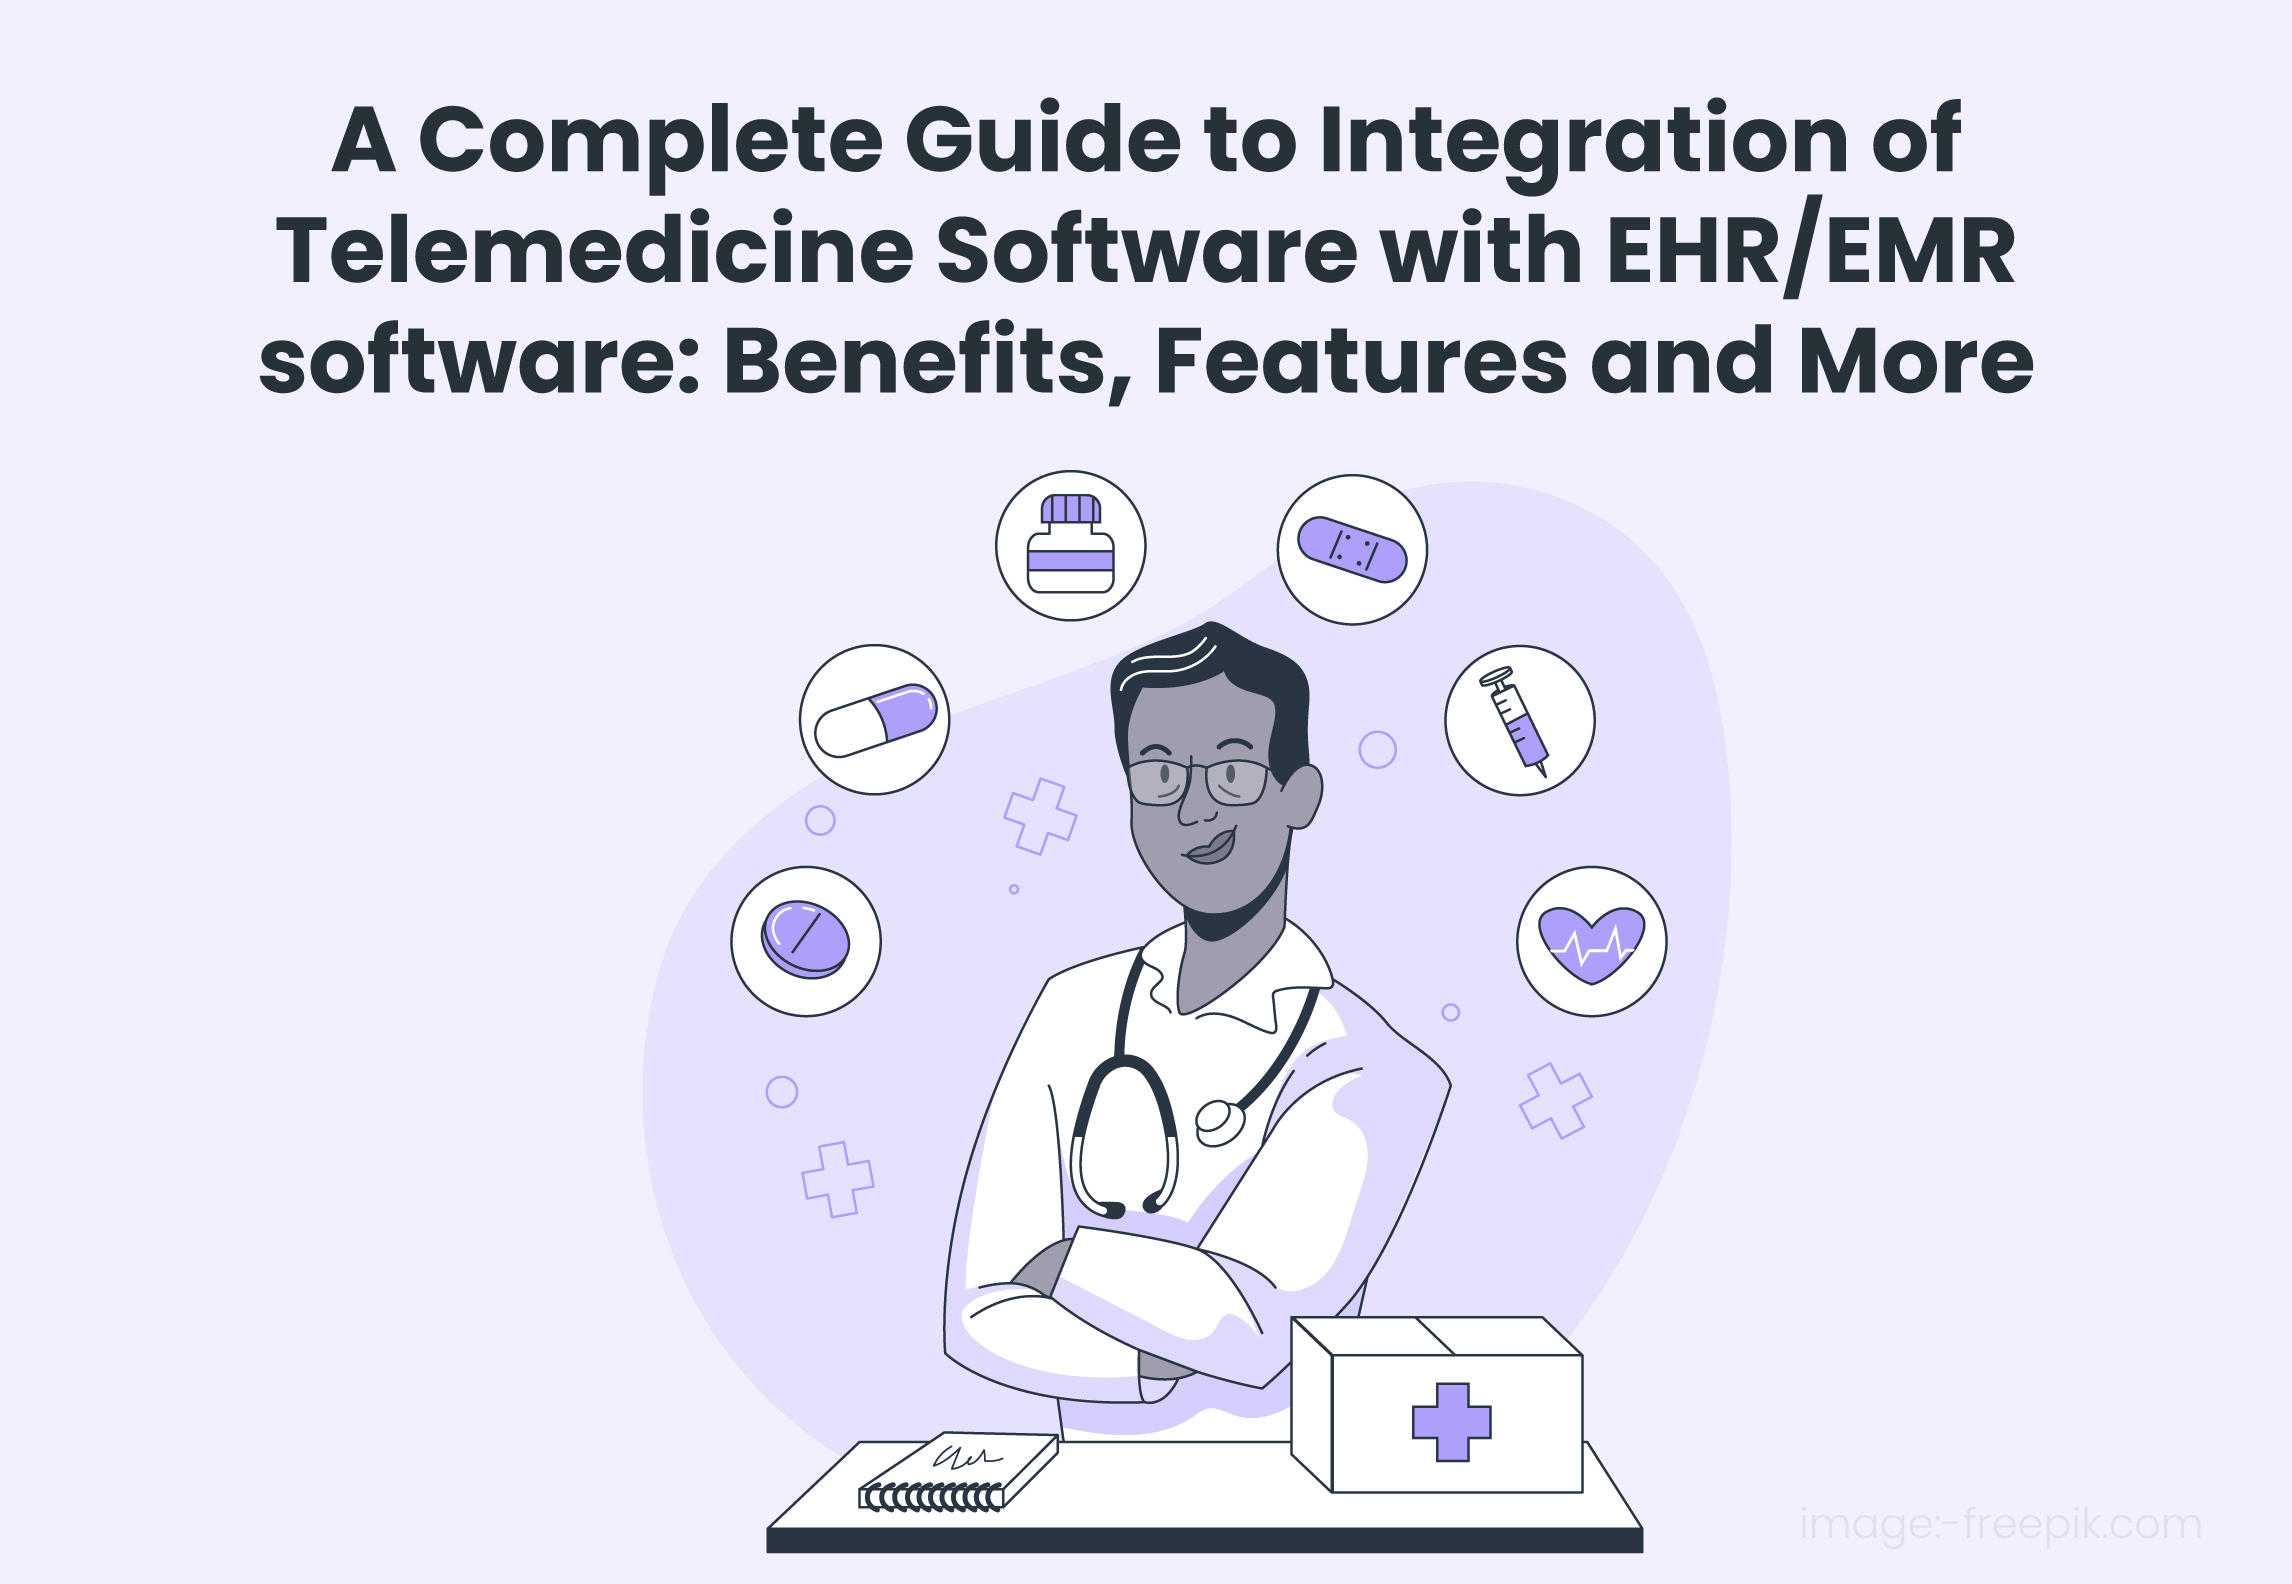 A-Complete-Guide-to-Integration-of-Telemedicine-Software-with-EHR-EMR-software--Benefits,-Features-and-More